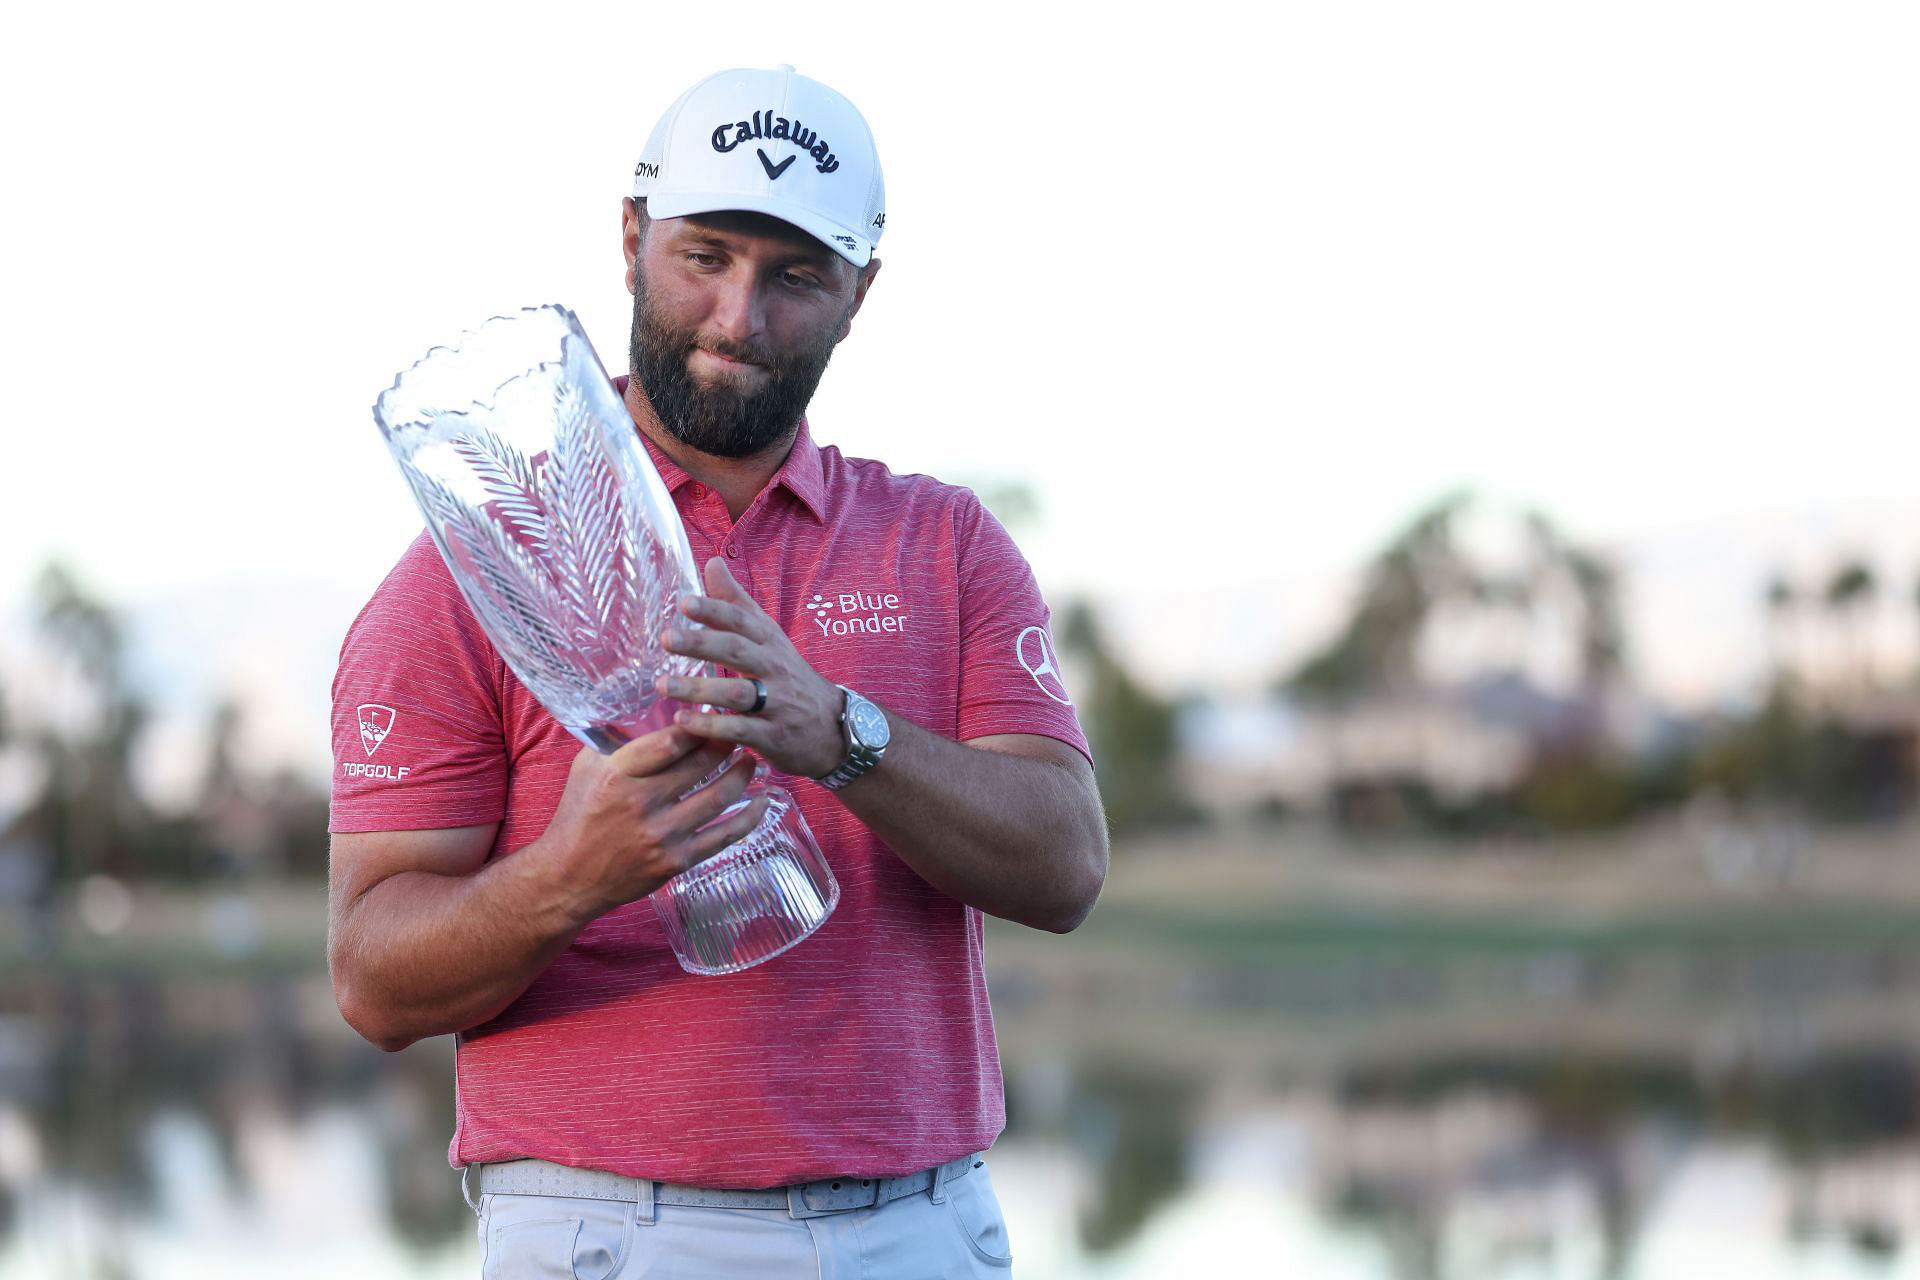 "Rhambo is LIVing it up" Defending champion Jon Rahm's exclusion from